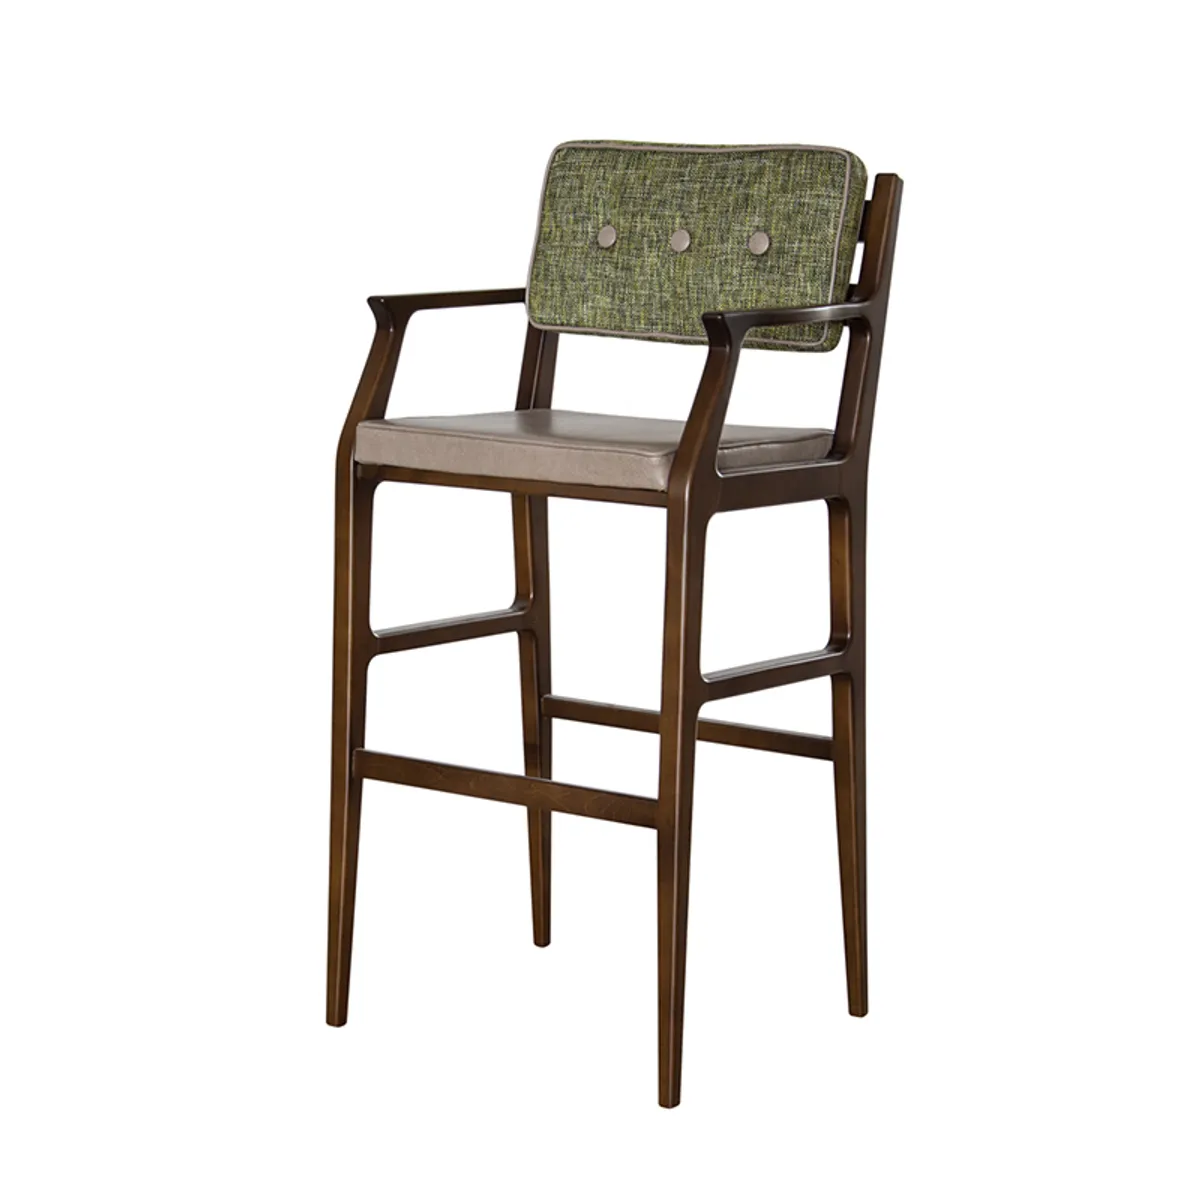 Linden Bar Stool Wooden Frame Stool For Bars And Hotels